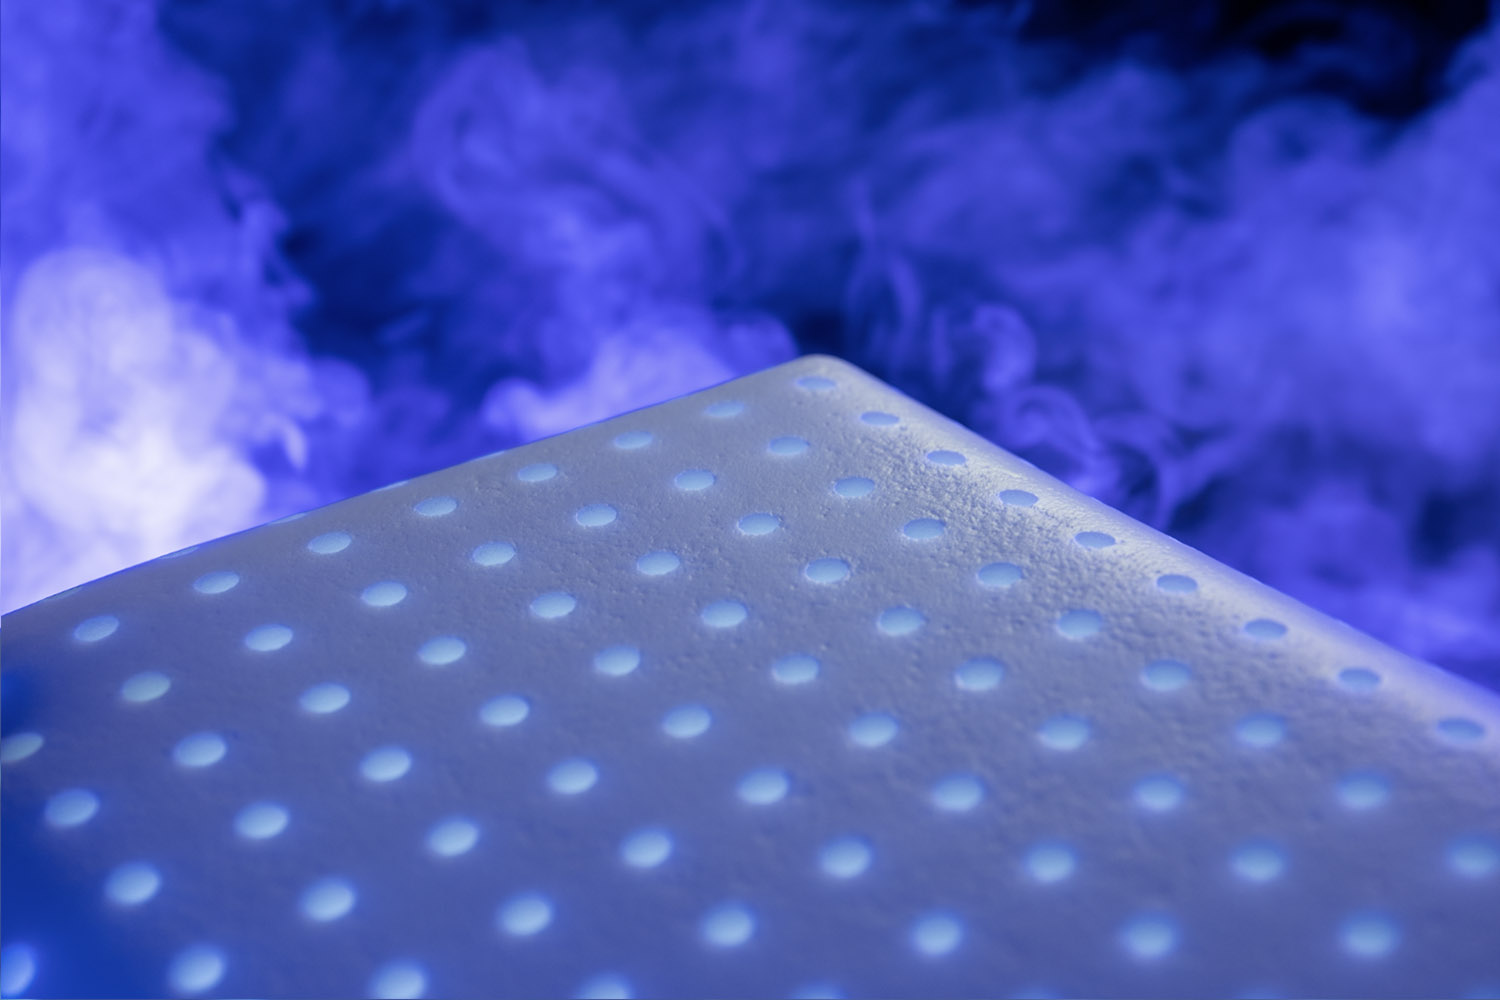 Stylized graphic of the aerated latex foam layer found on Octave Mirage and Horizon mattresses.